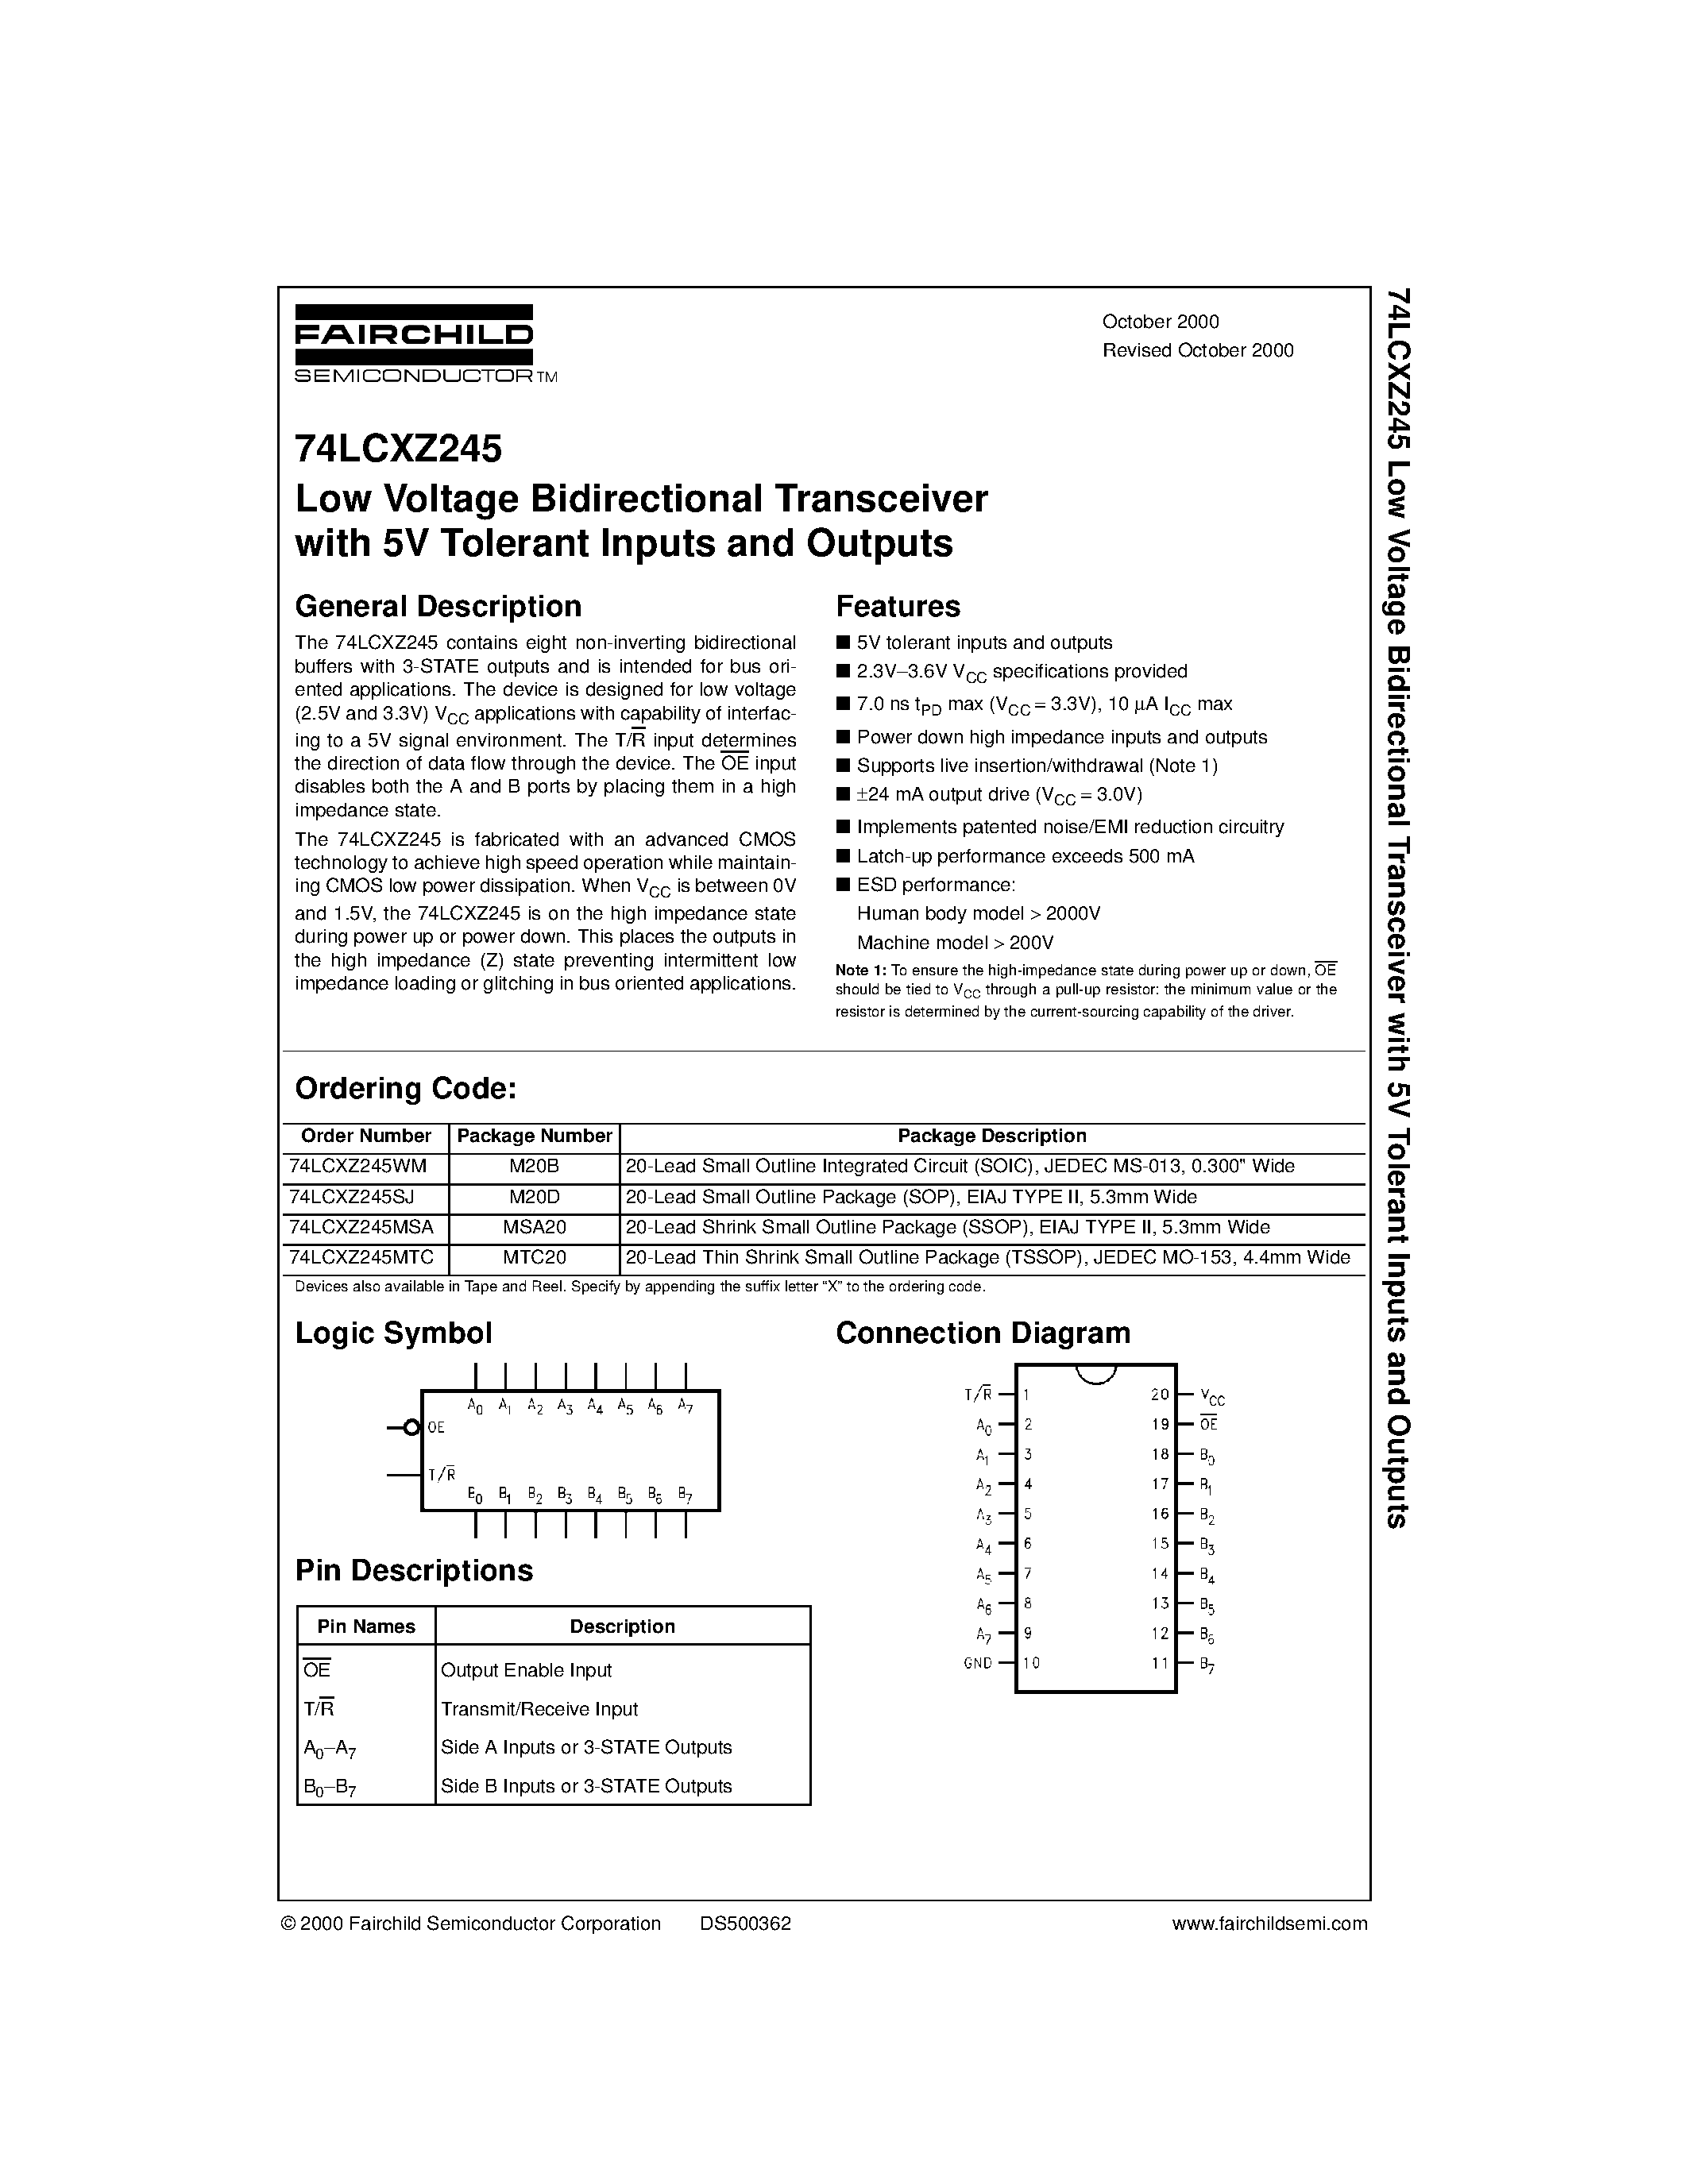 Datasheet 74LCXZ245 - Low Voltage Bidirectional Transceiver with 5V Tolerant Inputs and Outputs page 1